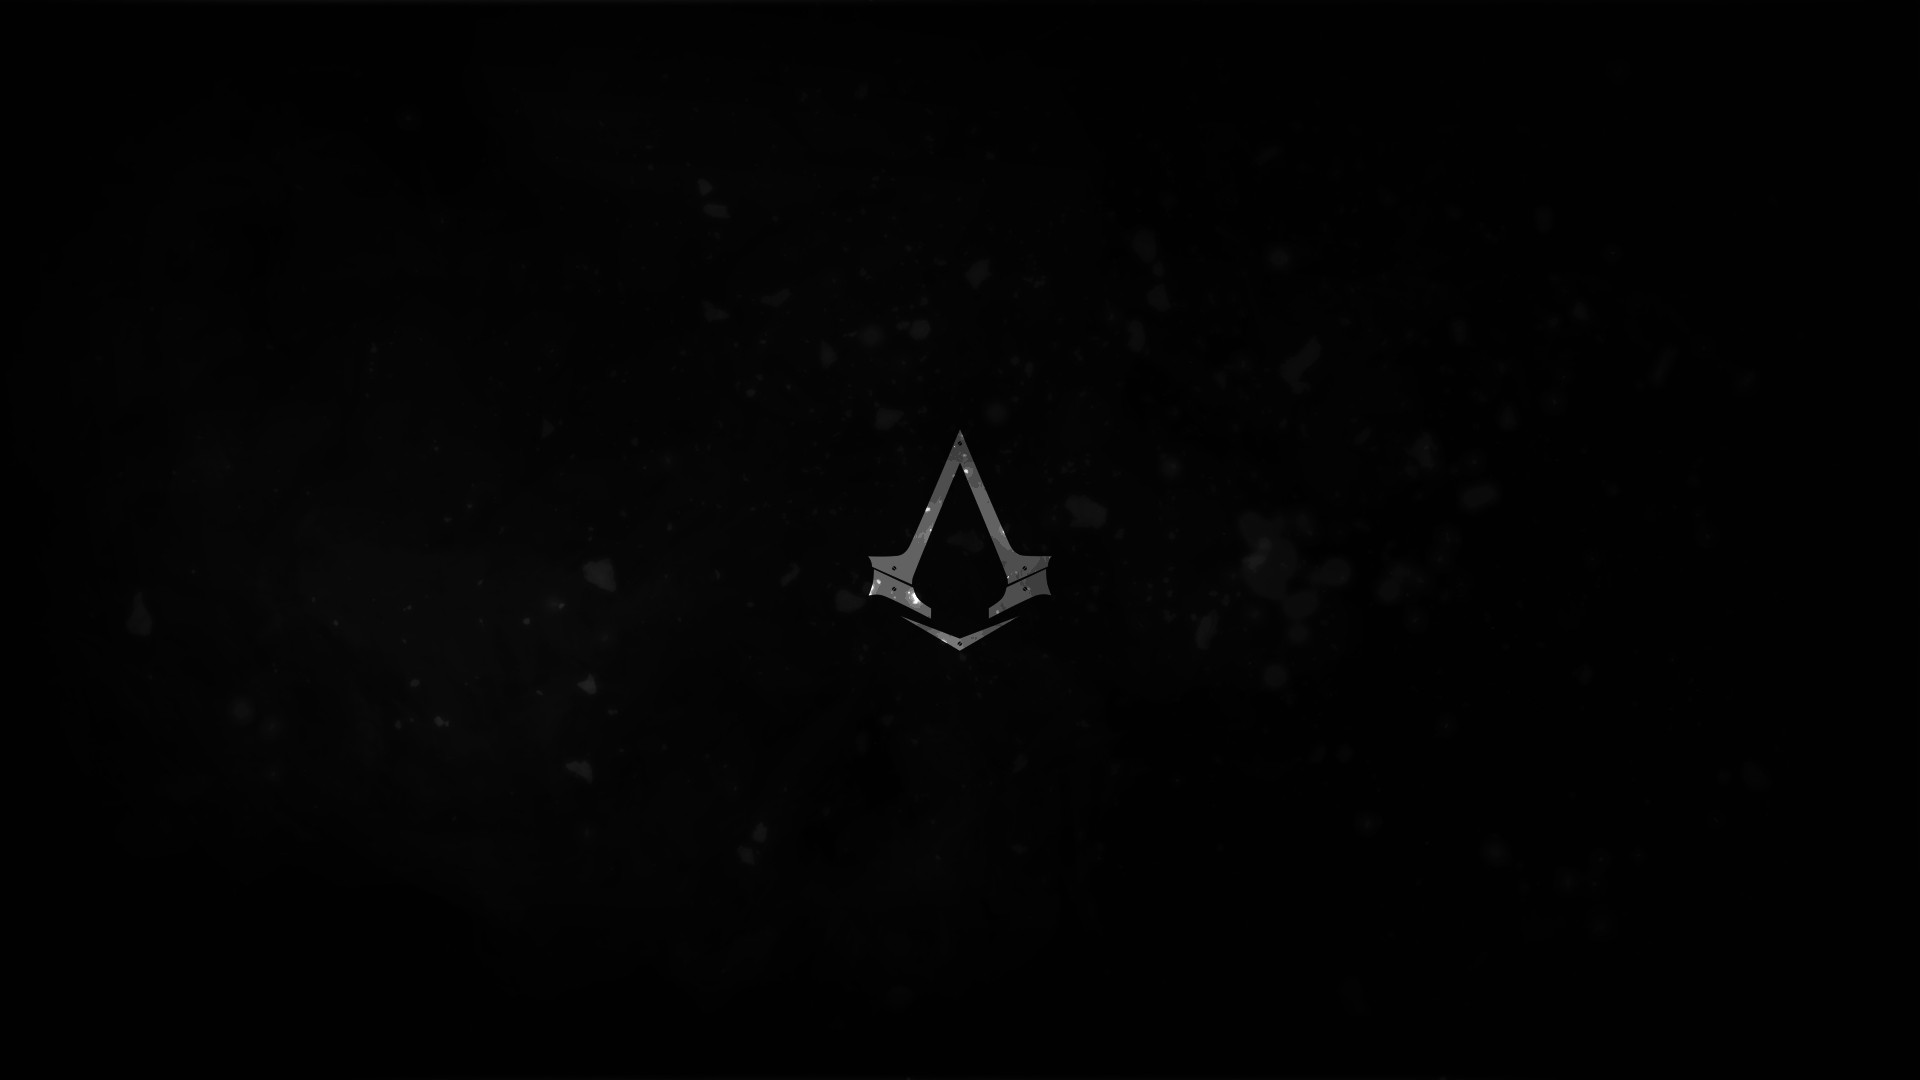 General 1920x1080 Assassin's Creed video games Assassin's Creed Syndicate black background black logo PC gaming minimalism simple background